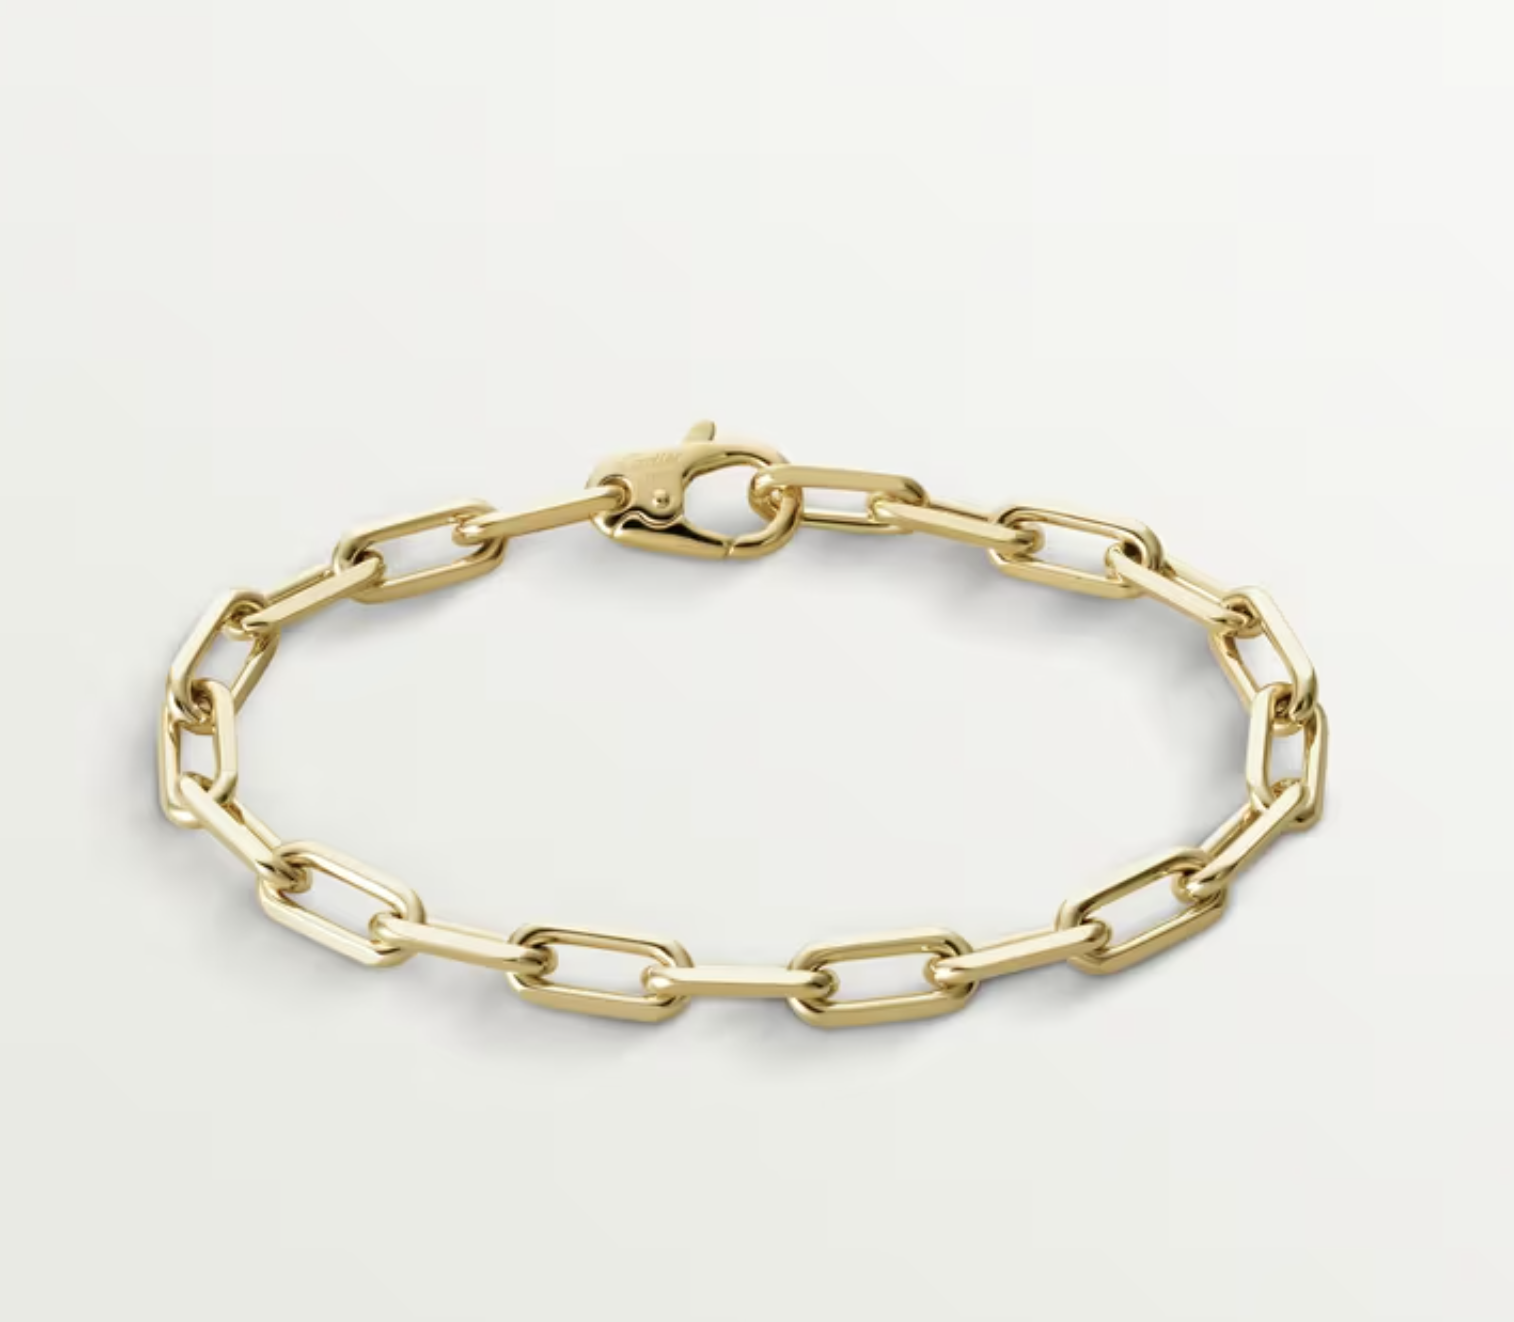 Infinity Chain Link Bracelet in Yellow, Rose or White Gold